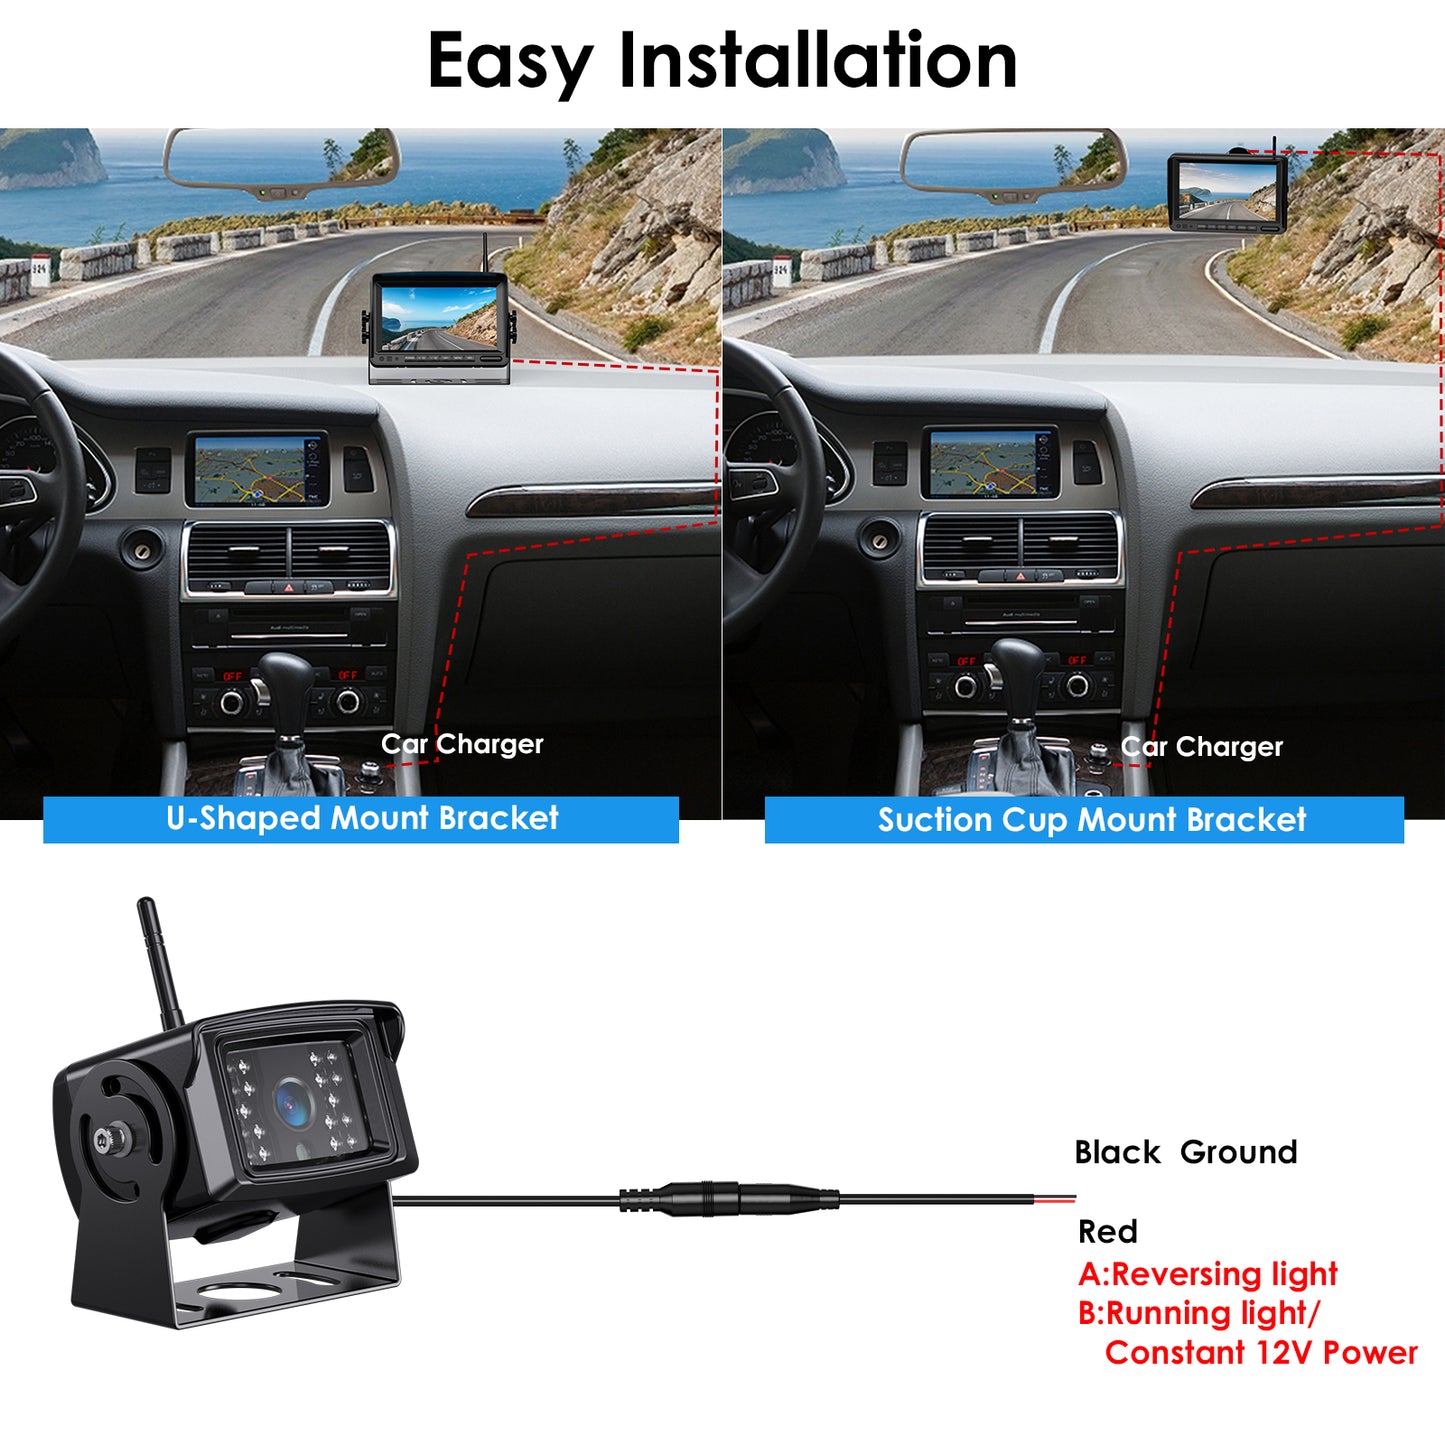 ZEROXCLUB Wireless Backup Camera System Kit for Rv/Truck/Bus/Pickup/Van, No Interference,Night Vision, IP69 Waterproof Rear View Camera + 7’’ LCD Wireless Reverse Monitor  (W01-7 inch)